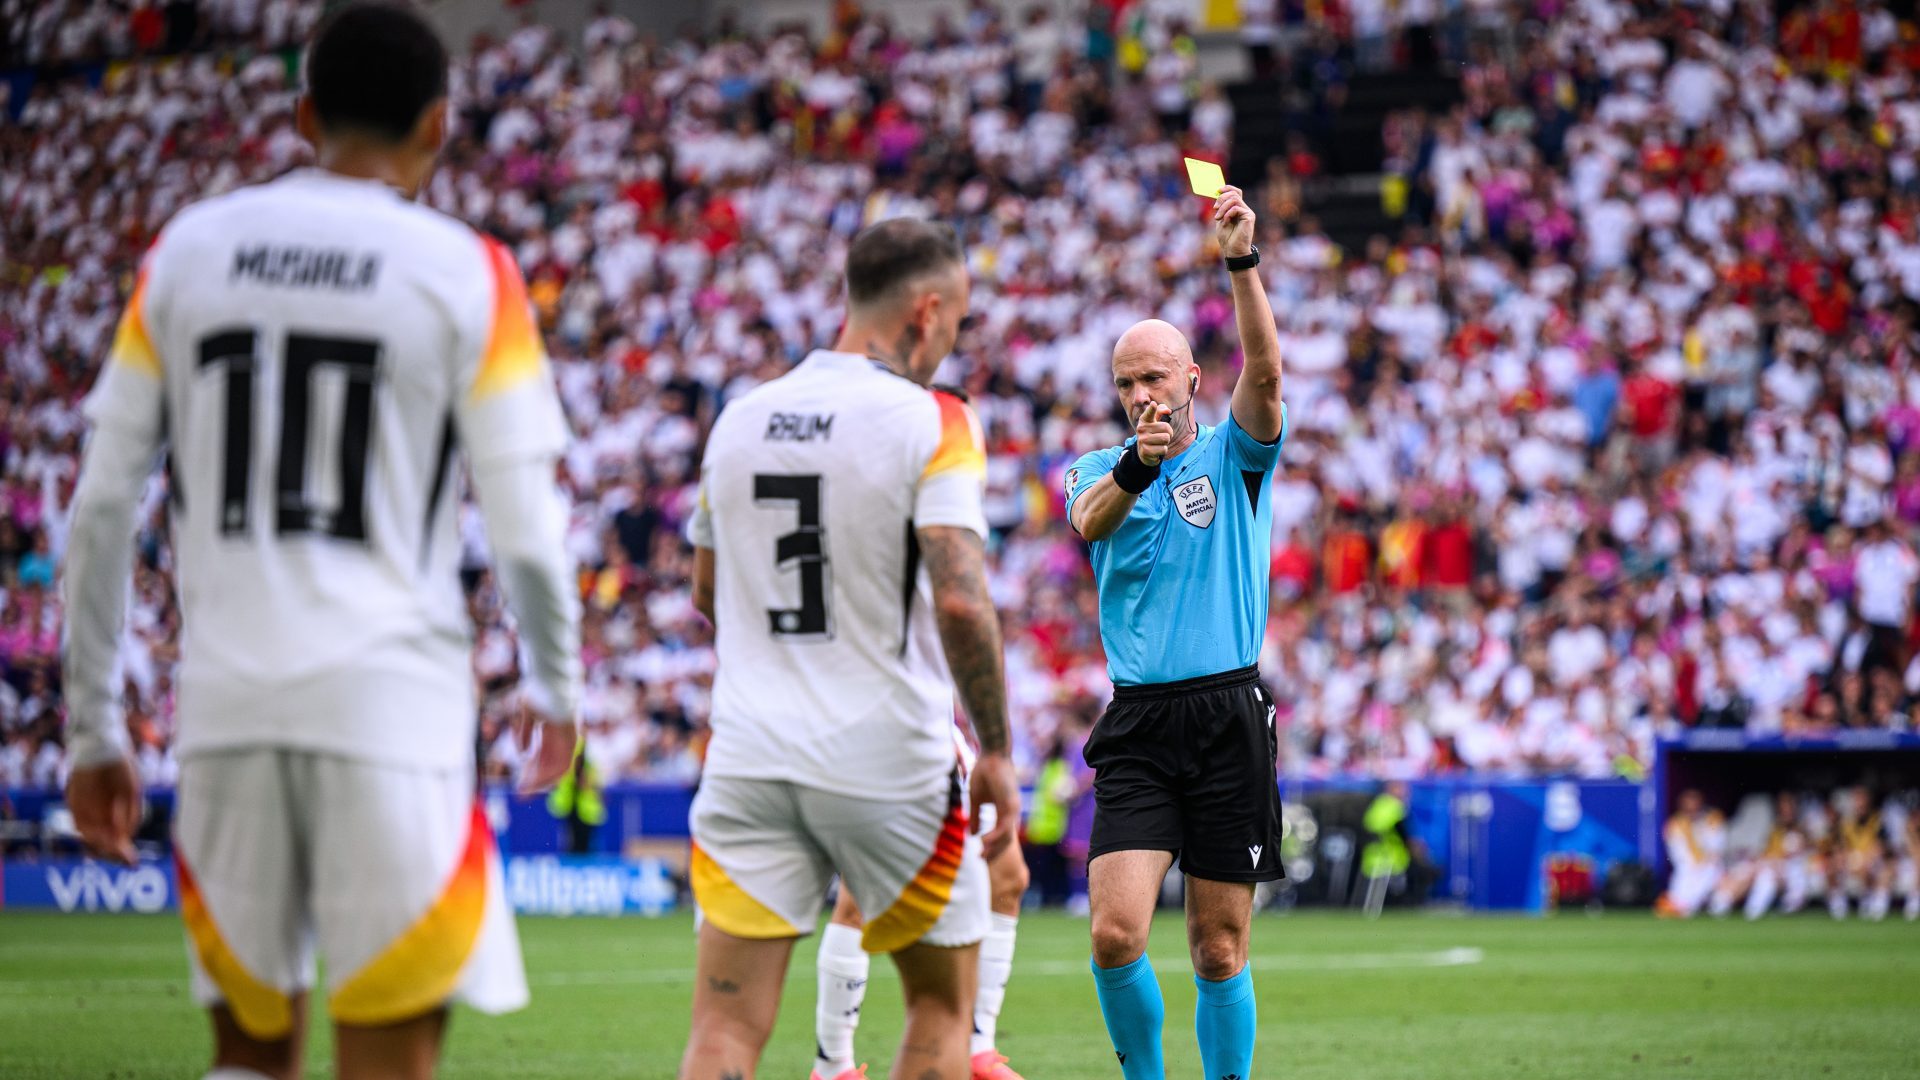 Referee Anthony Taylor shows the yellow card during the quarter-final match between Spain and Germany at Stuttgart Arena on July 5, 2024. Photo: Marvin Ibo Guengoer/GES Sportfoto/Getty